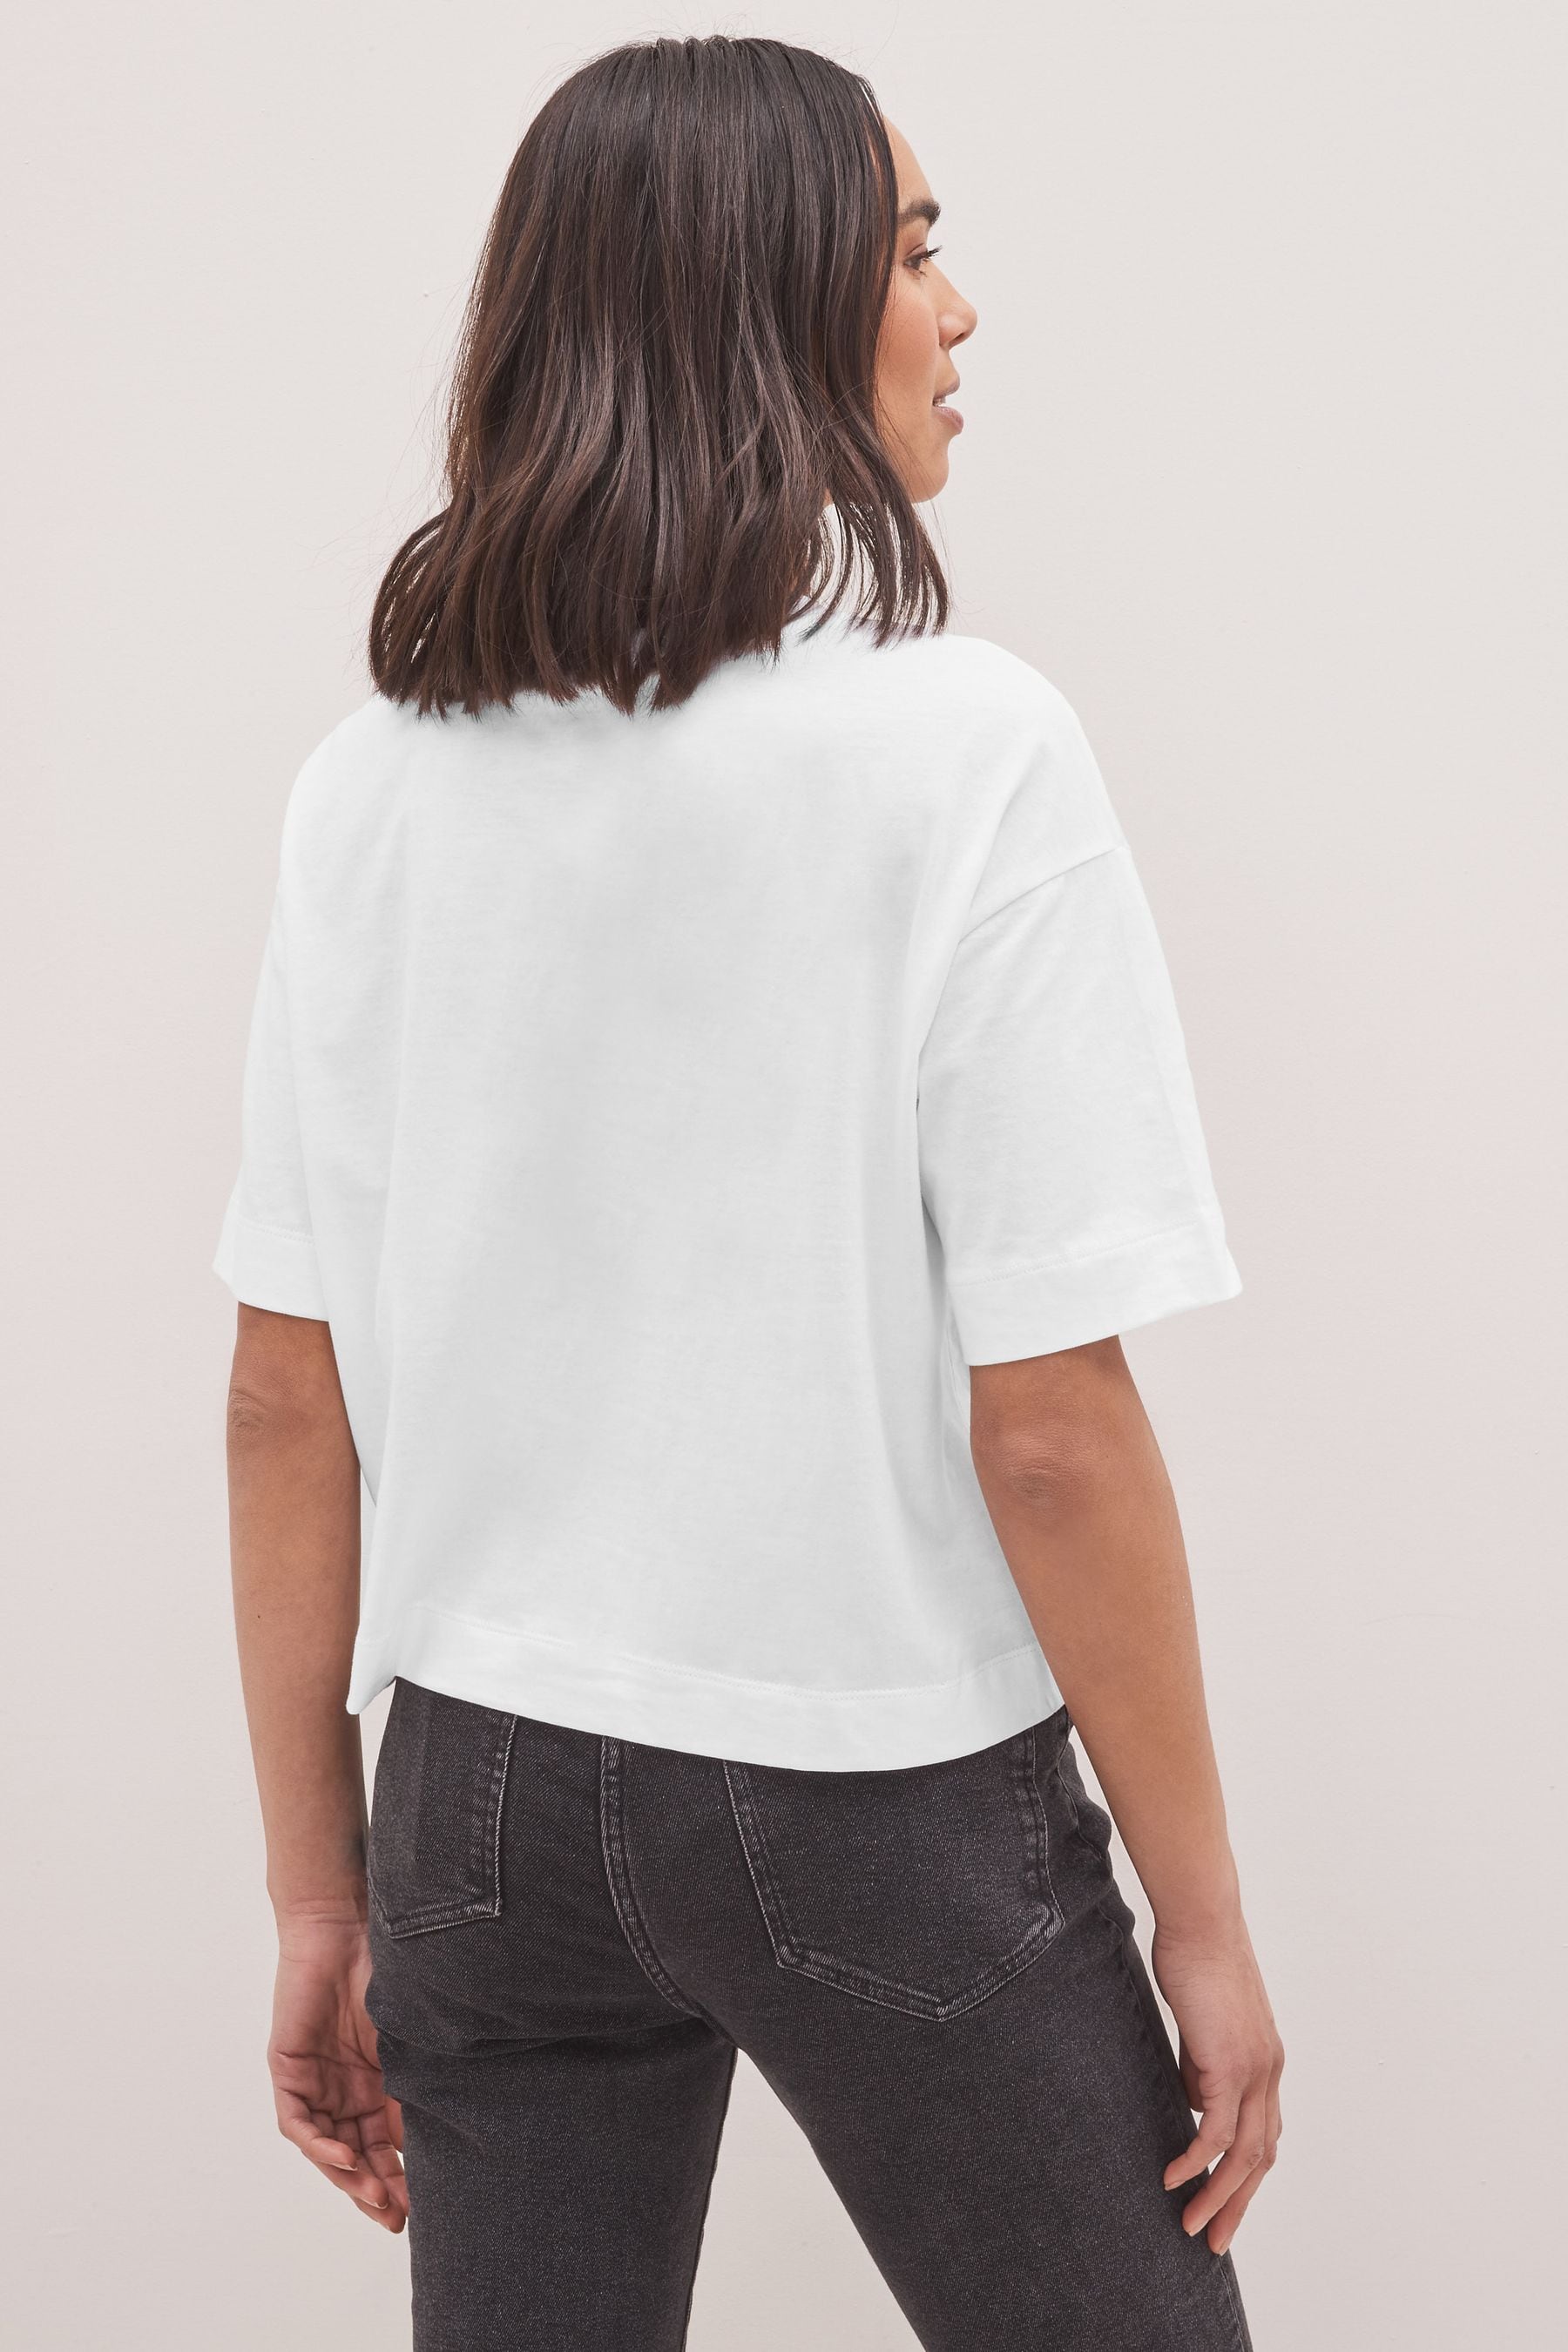 Buy White Boxy Relaxed Fit T-Shirt from the Next UK online shop